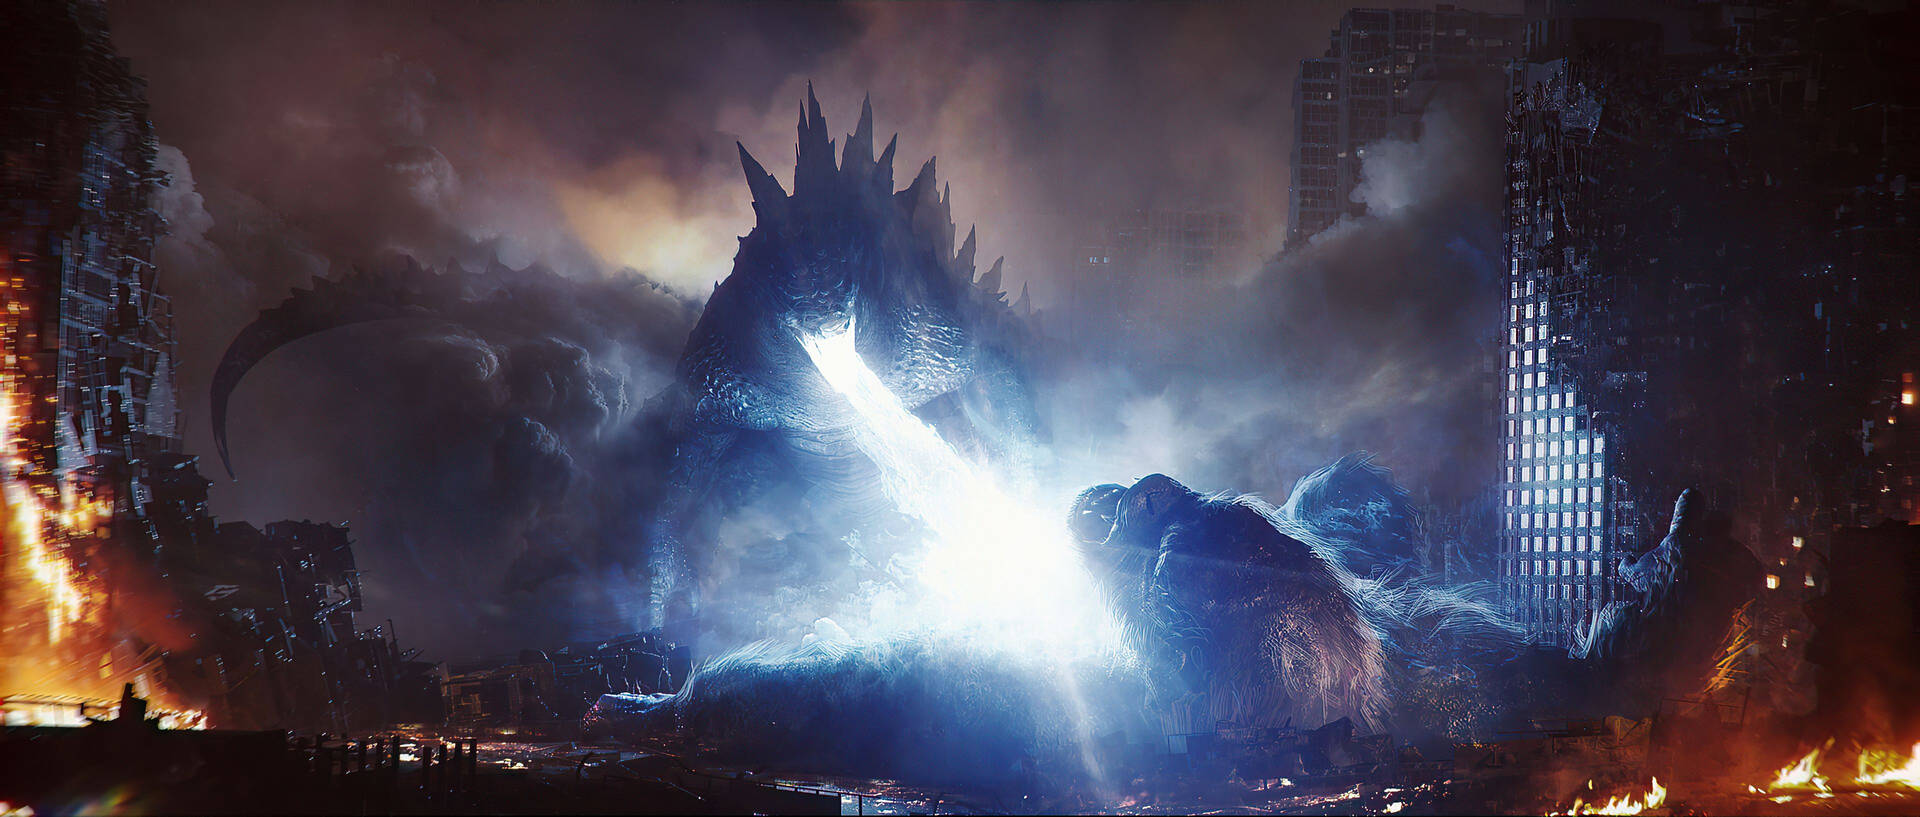 Kong And Godzilla Take Center Stage In The Upcoming Movie Background